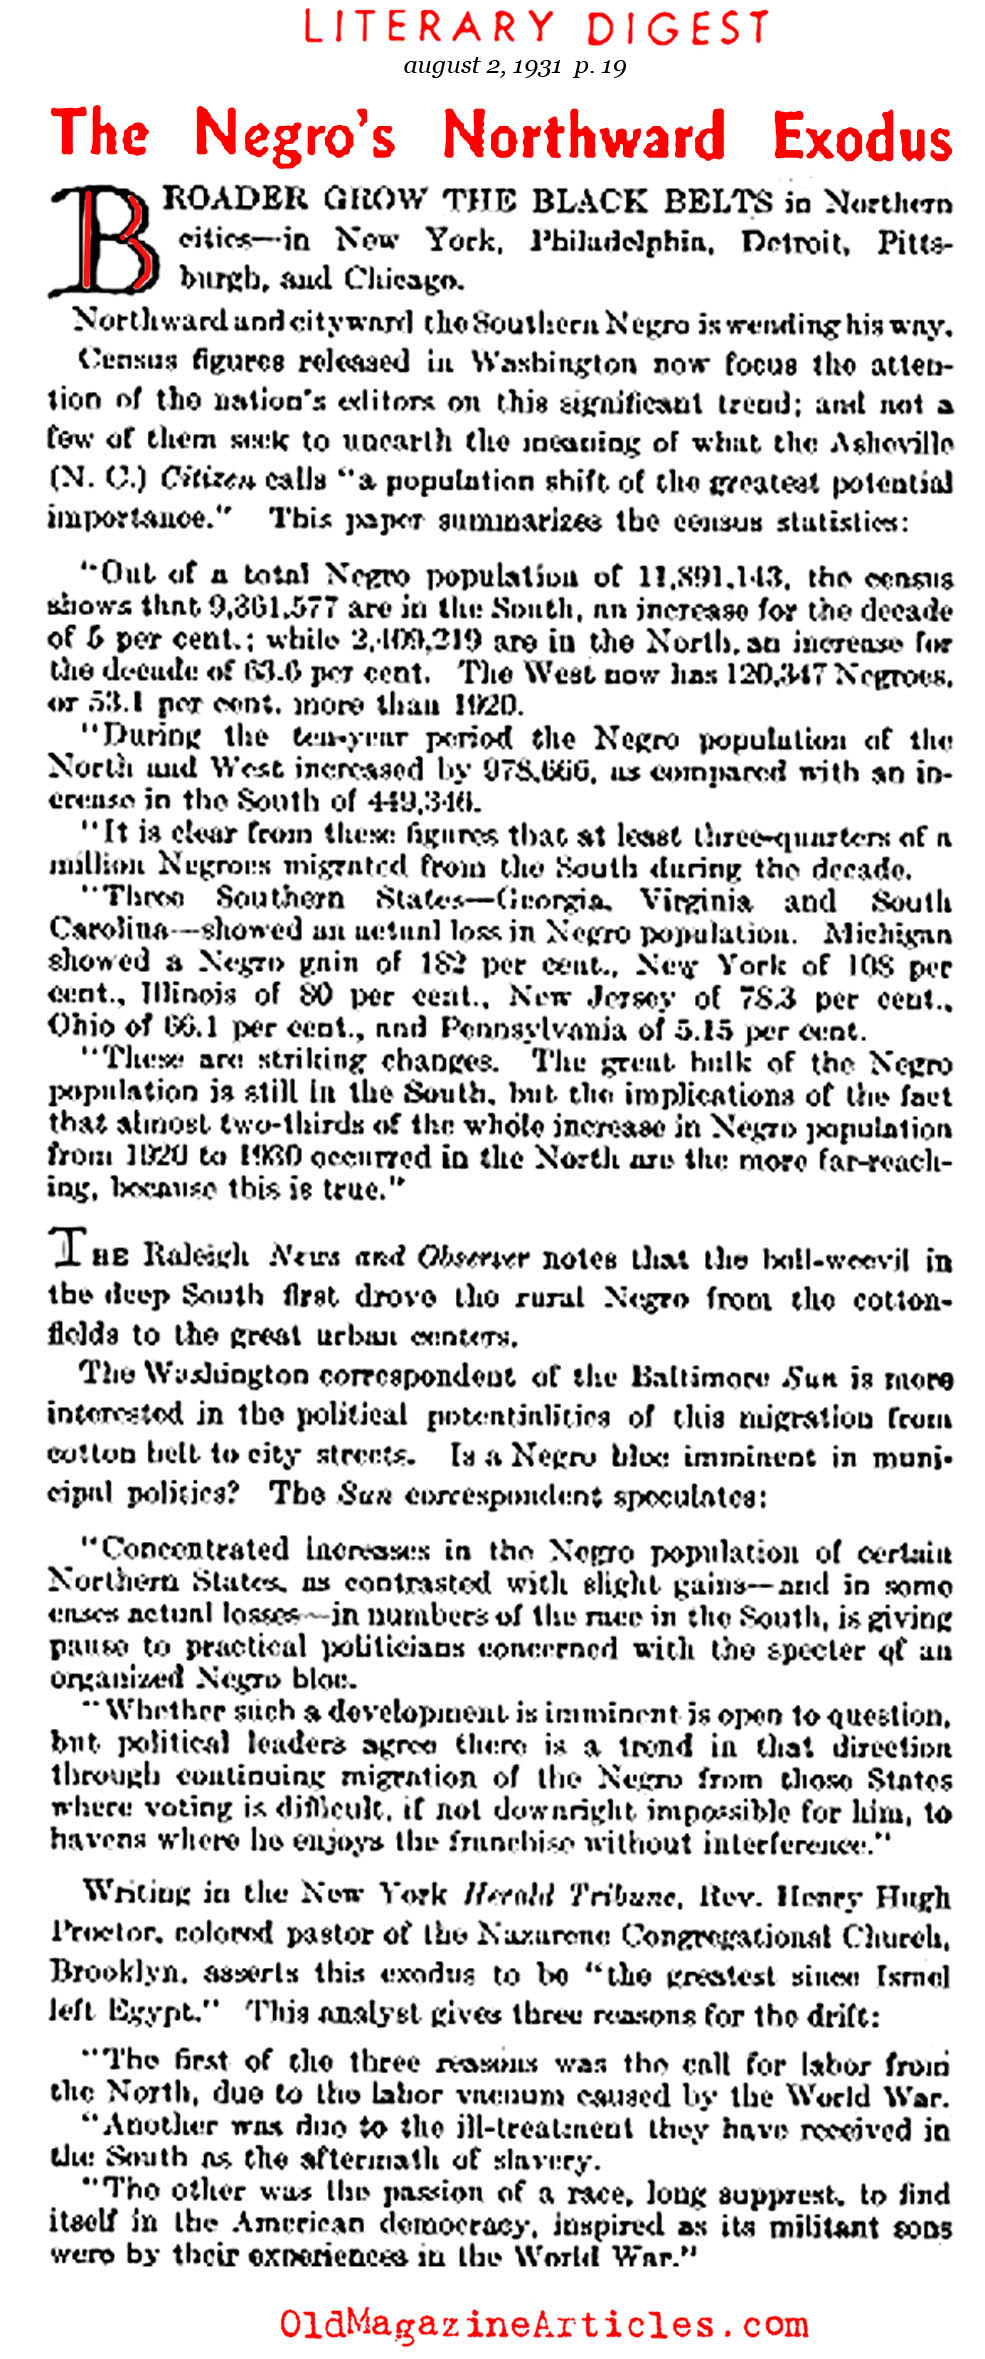 The Negro's Northern Exodus (The Literary Digest, 1931)